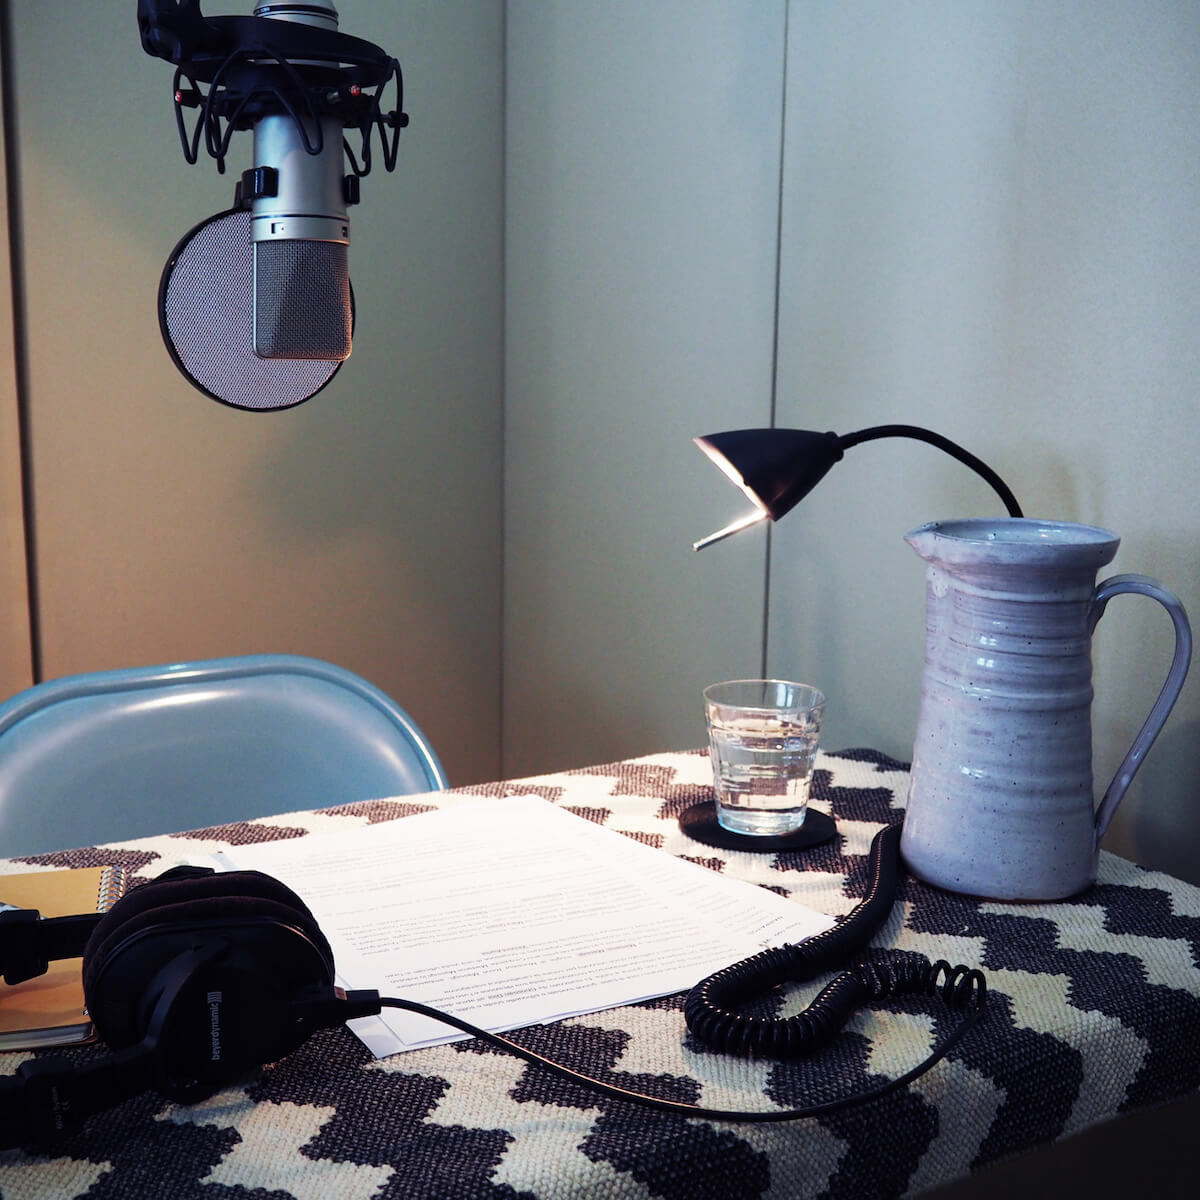 A microphone and desk inside our podcast studio space